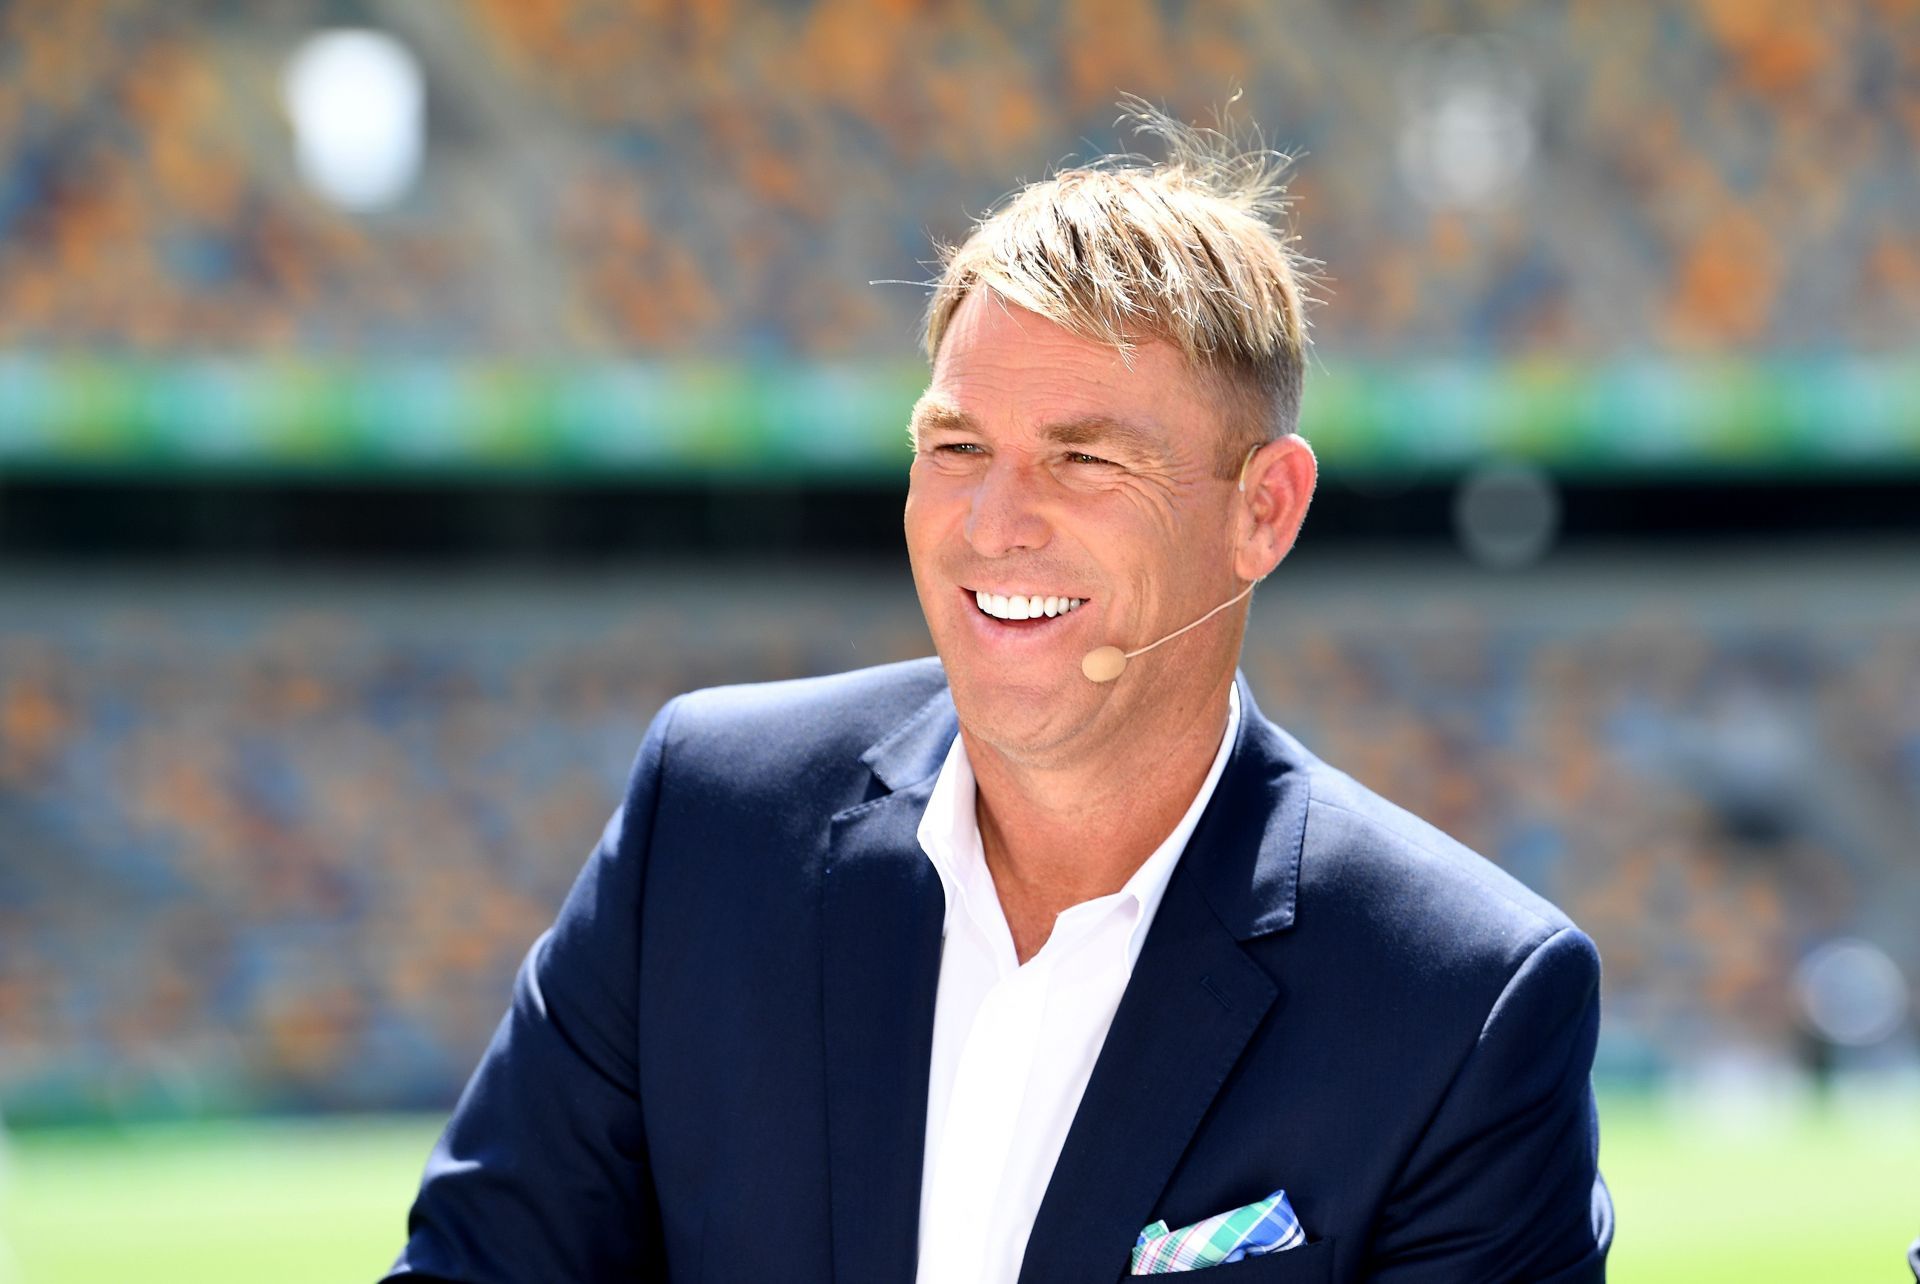 Shane Warne largely escaped unscathed after the motorbike accident